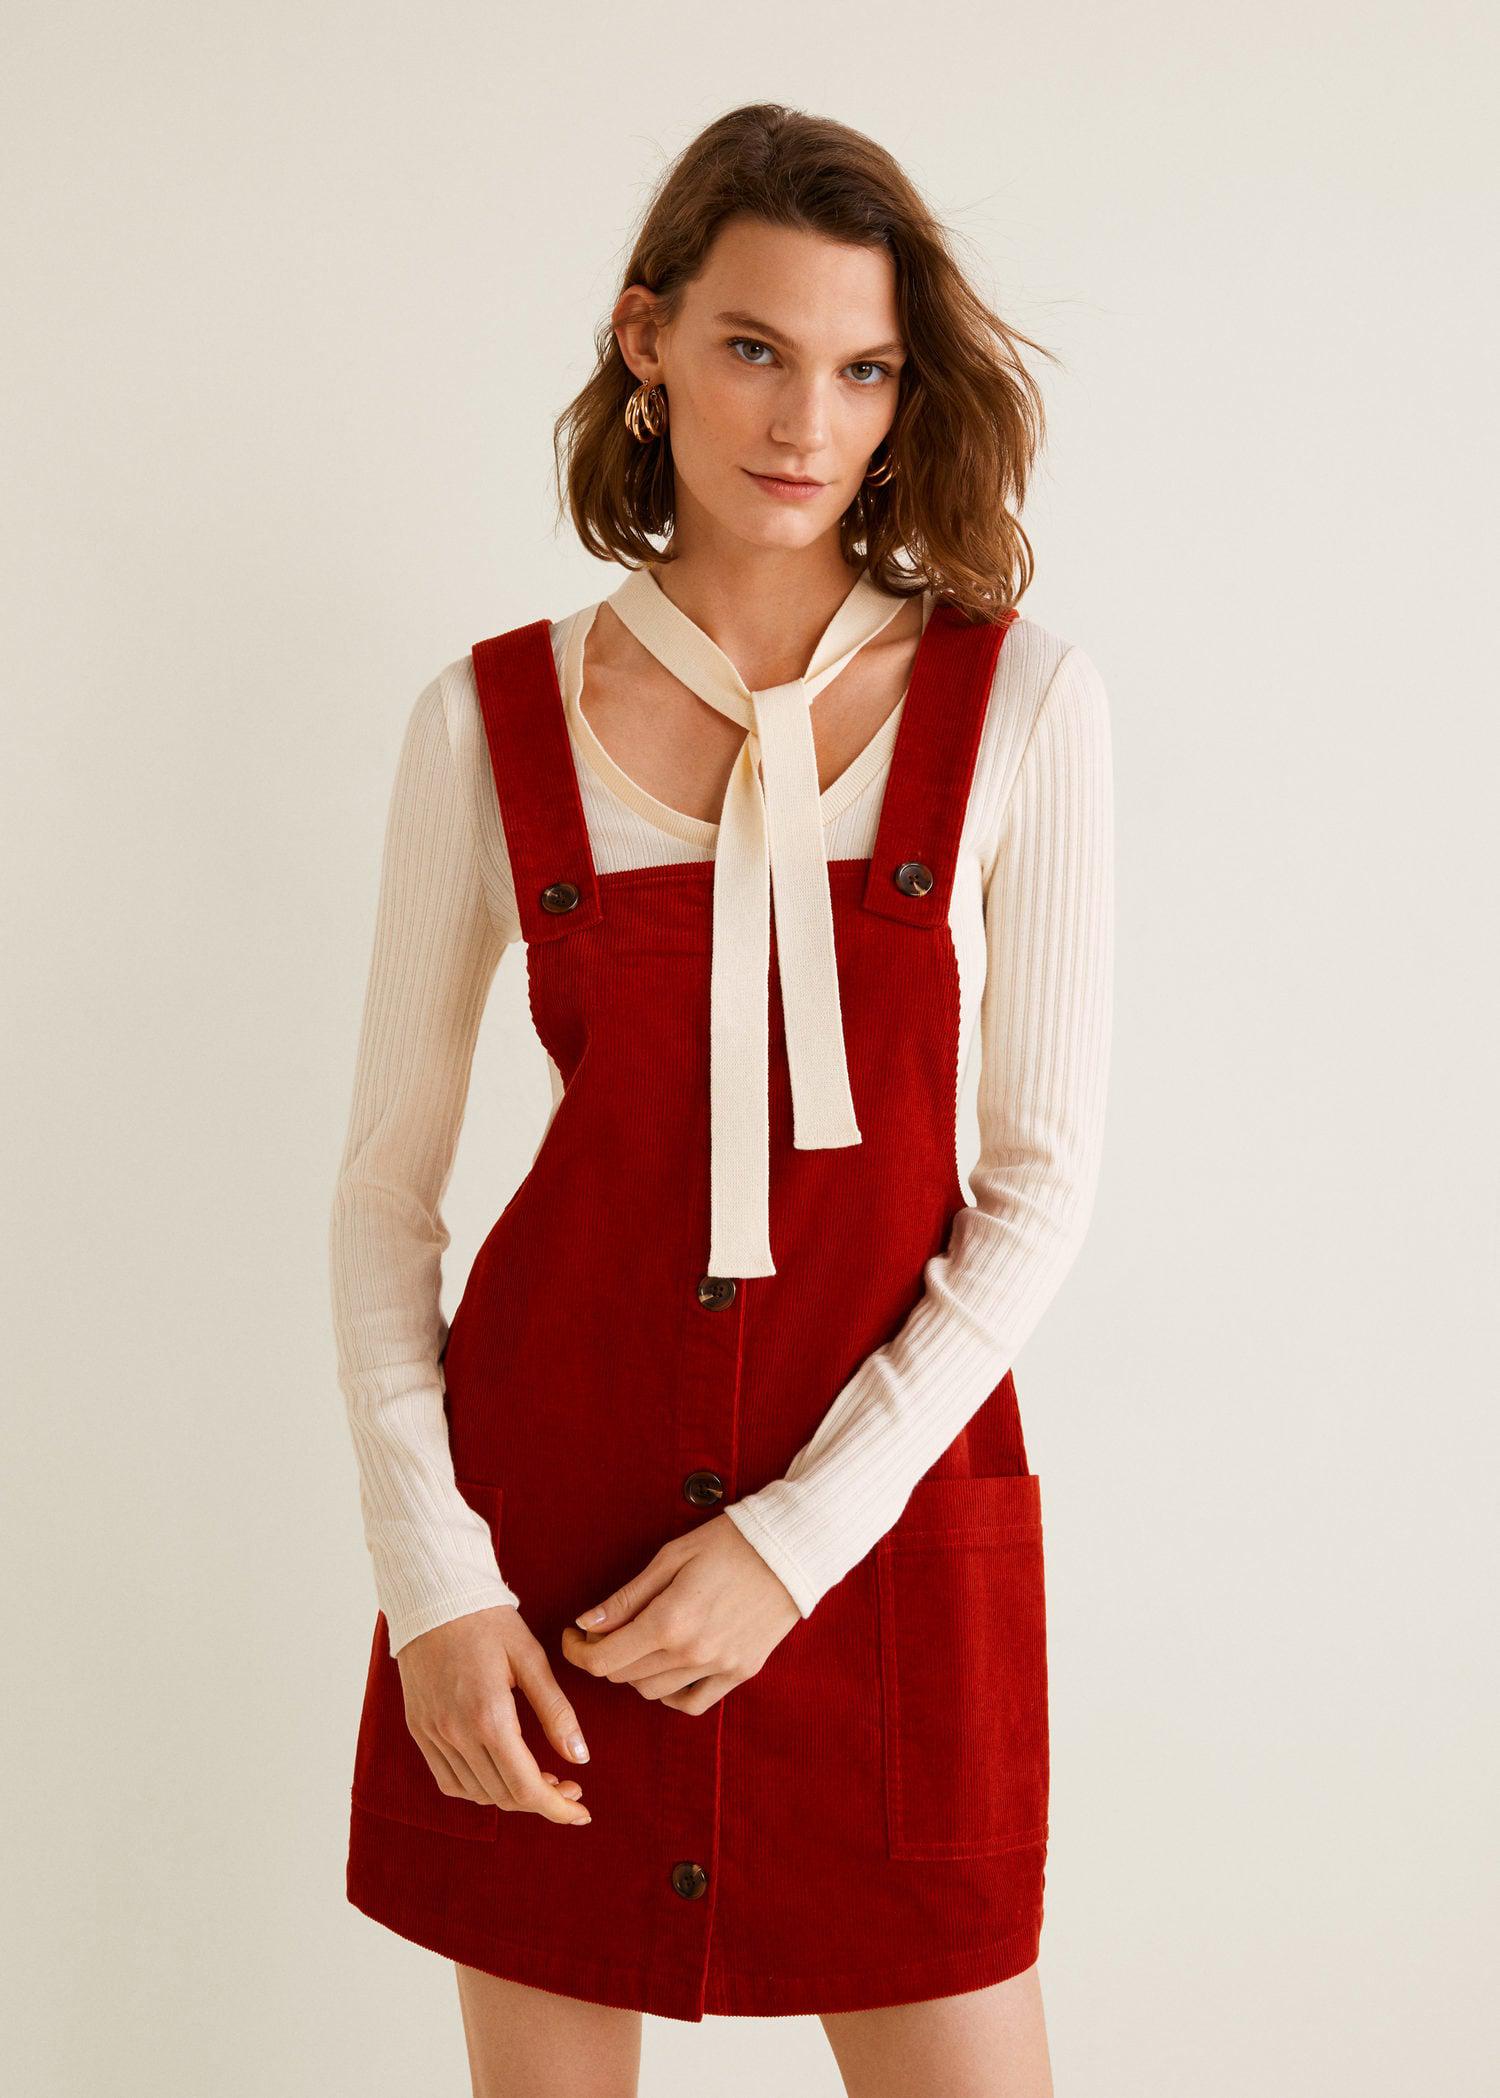 Mango Corduroy Pinafore Dress in Red - Lyst